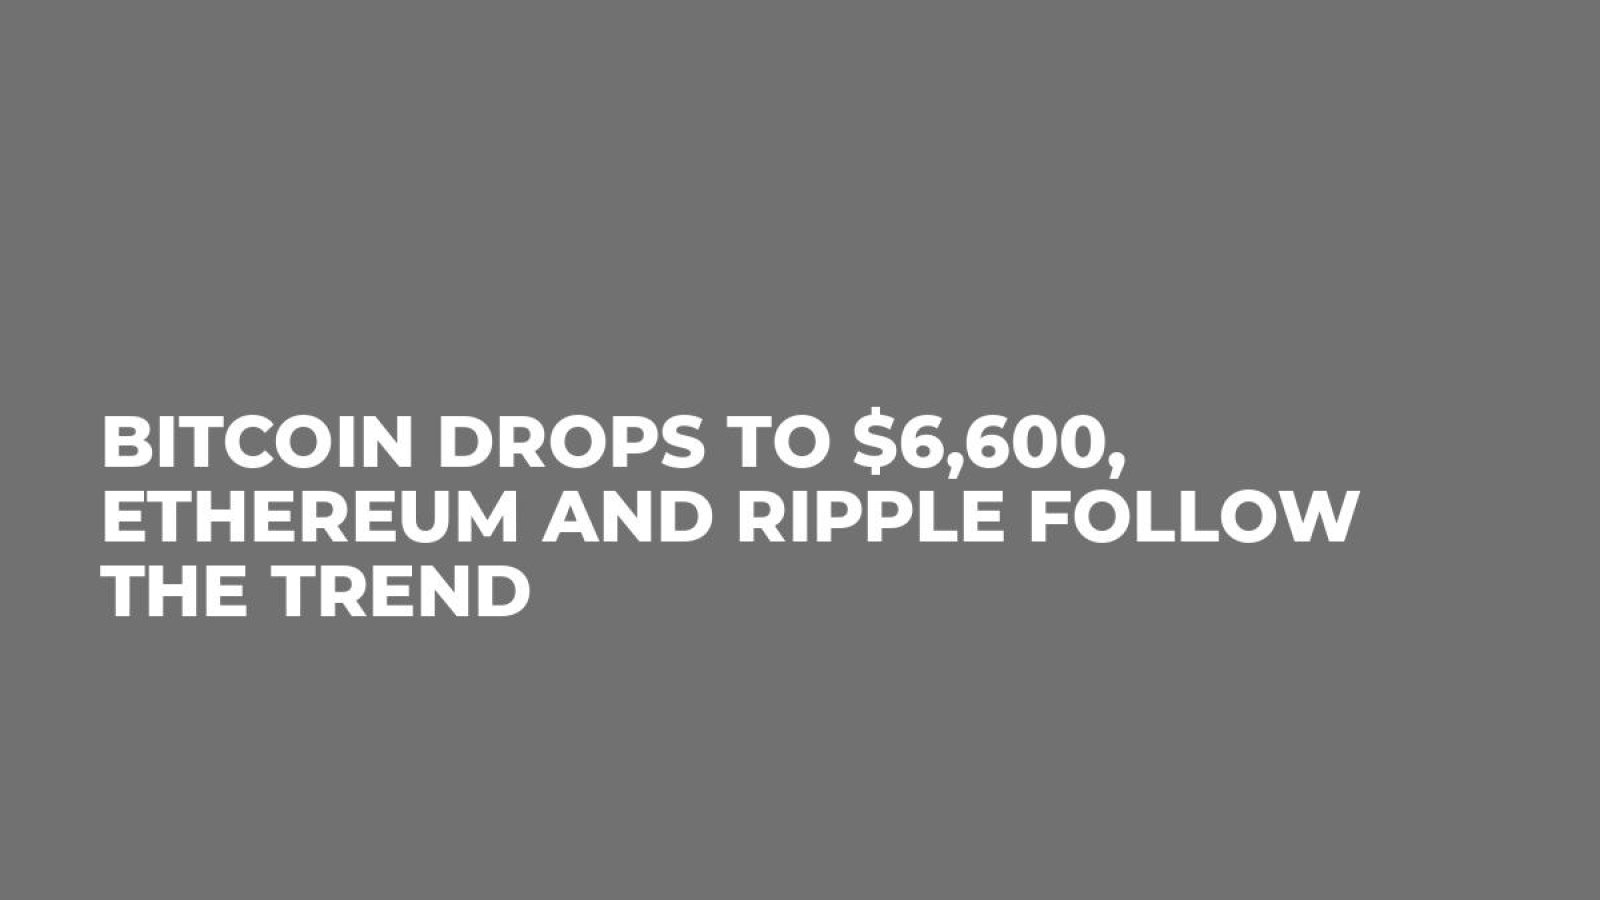 Bitcoin Drops to $6,600, Ethereum and Ripple Follow the Trend